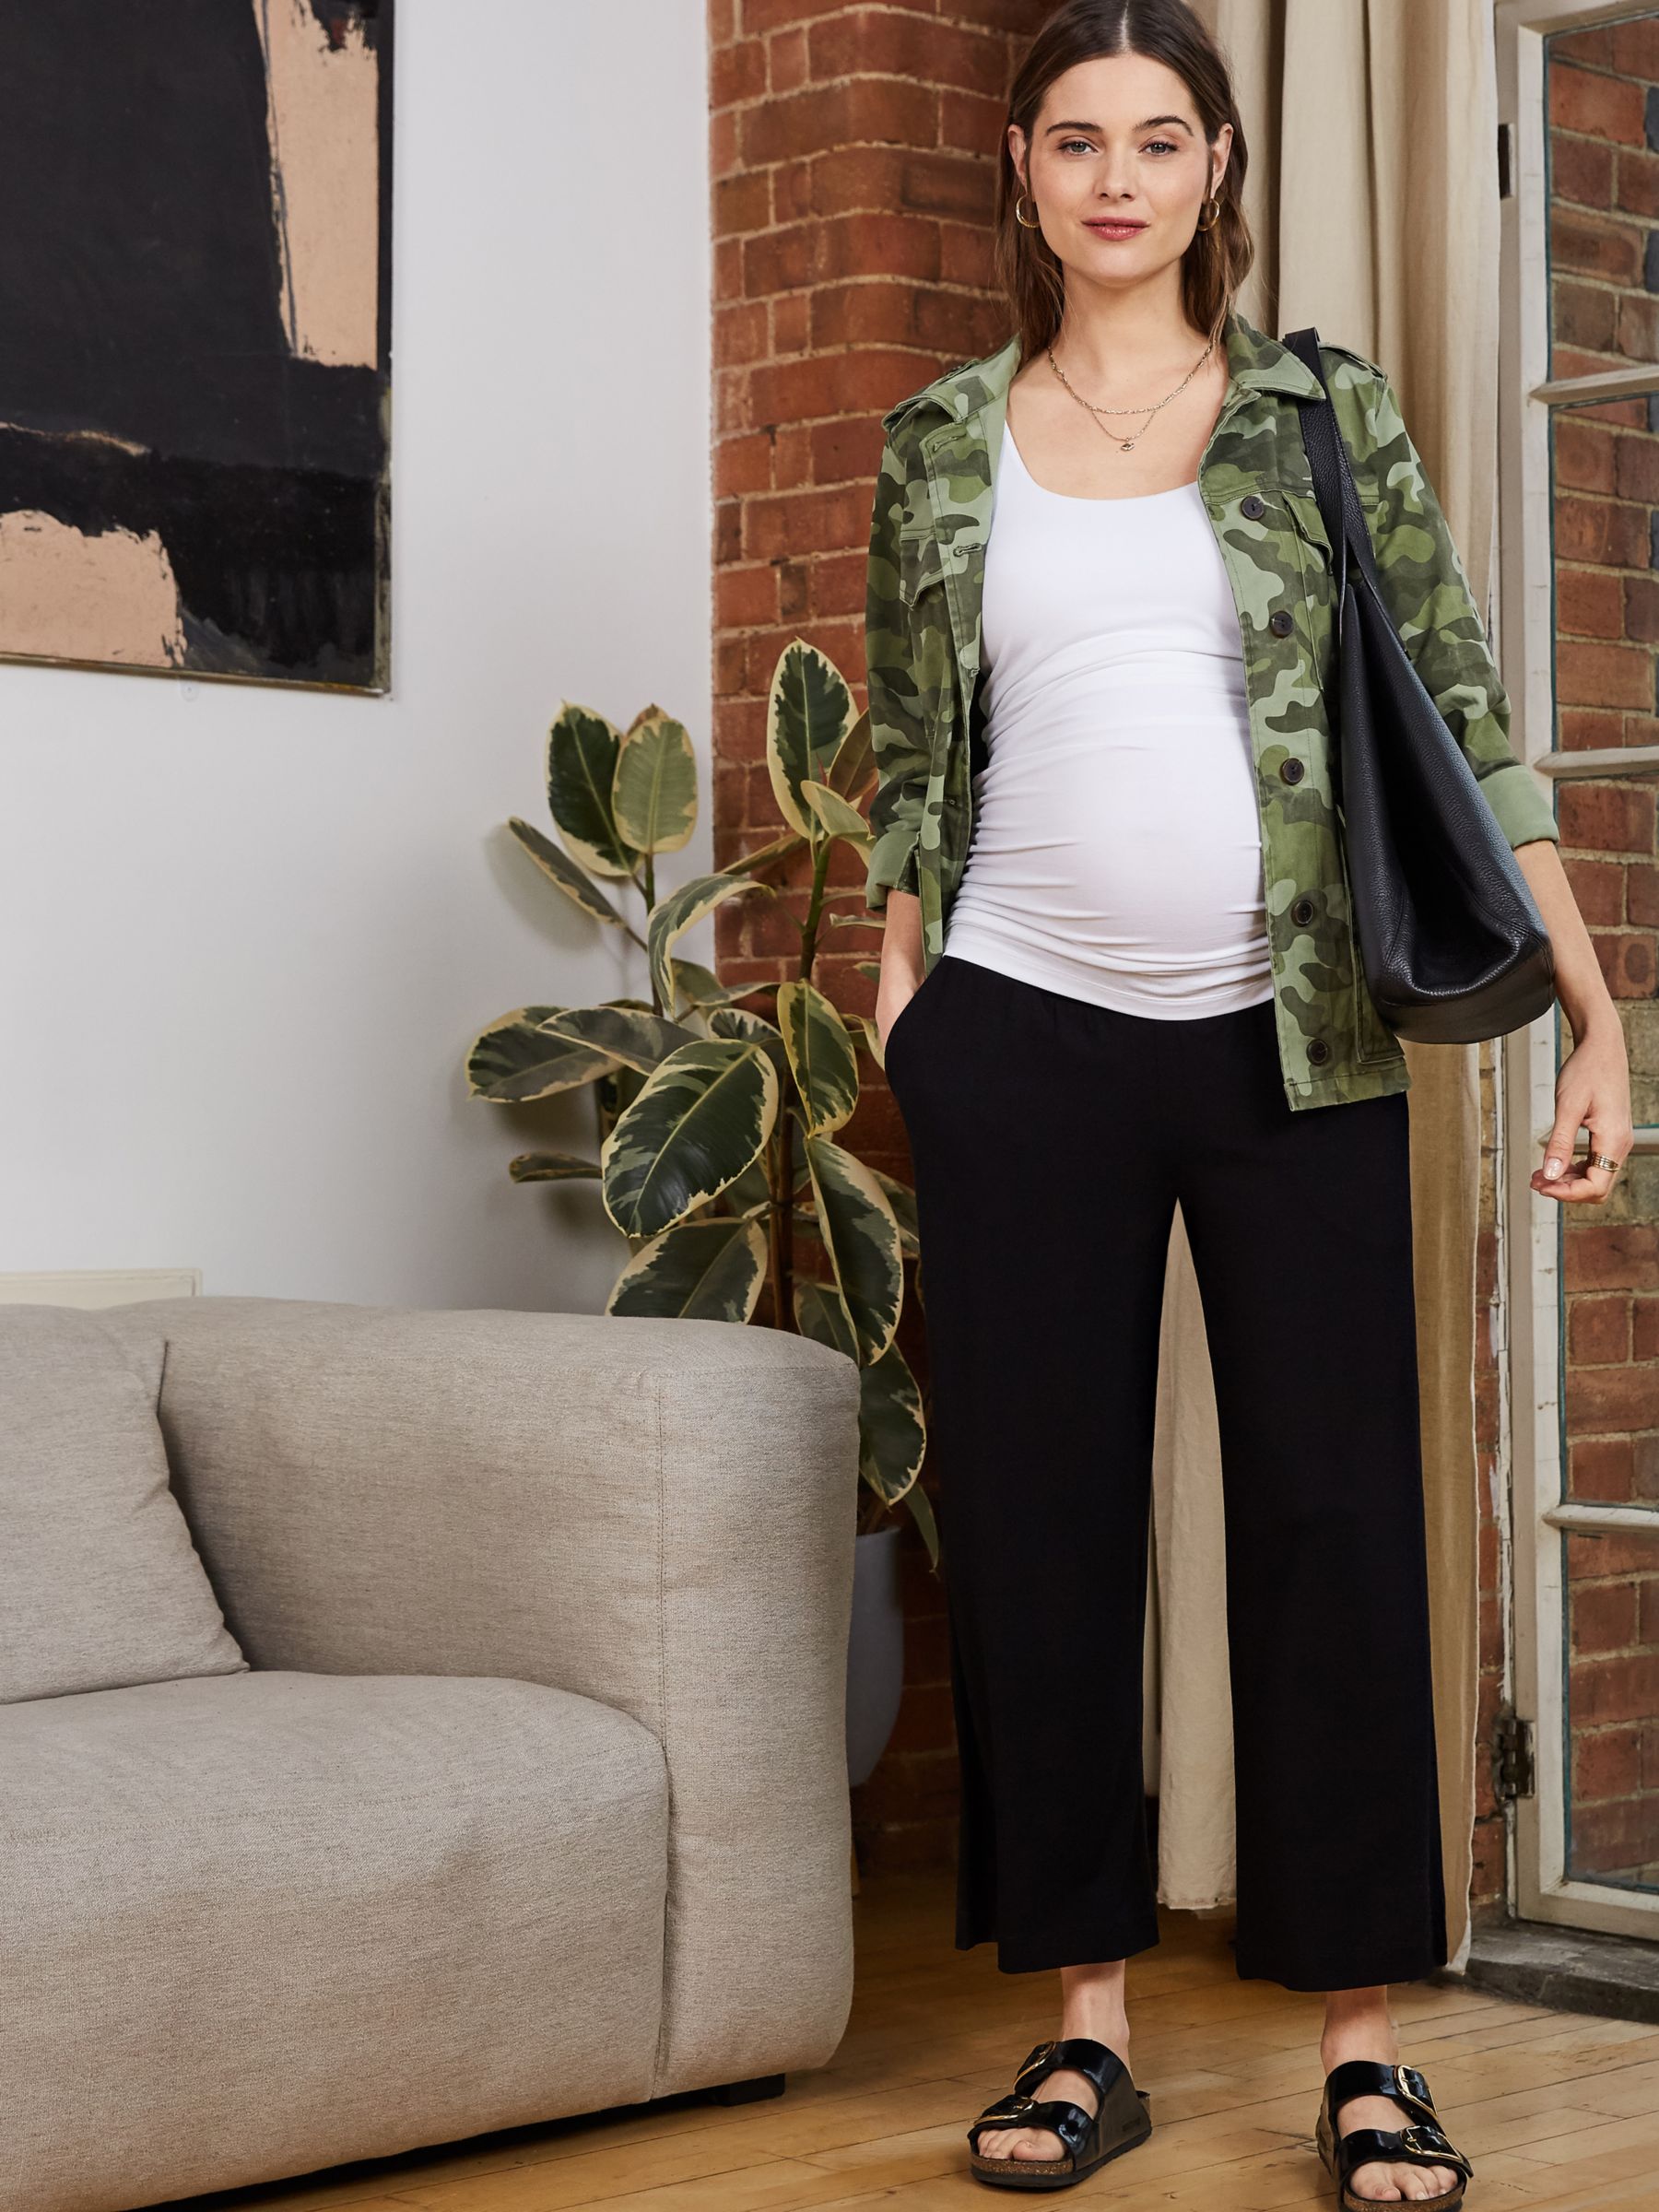 Buy Isabella Oliver Bethany Maternity Trousers, Caviar Black Online at johnlewis.com